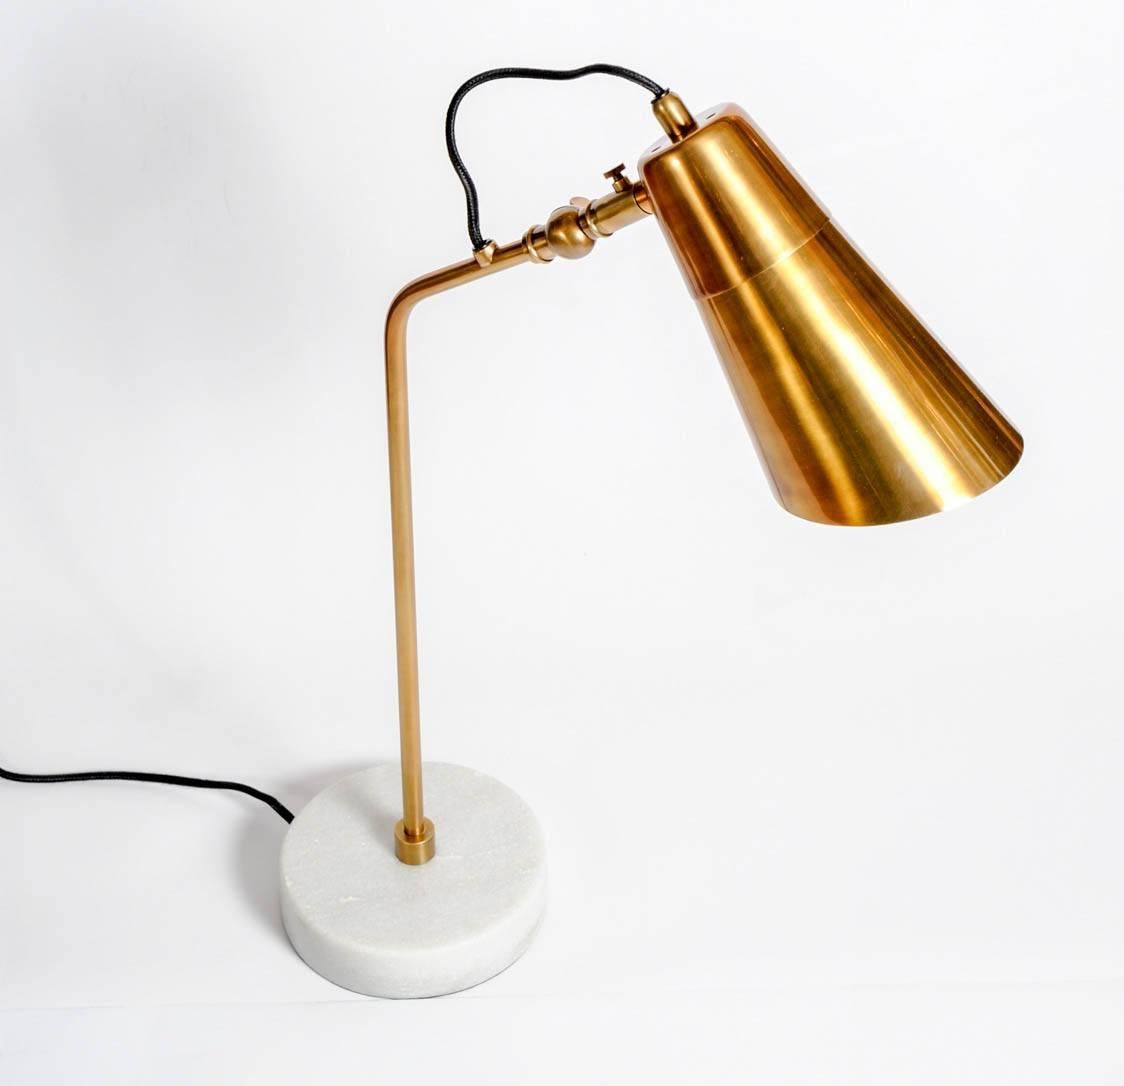 Nice table lamps with steady white marble foot, and all coppered brass body, ideal for desks with it's adjustable sconce.